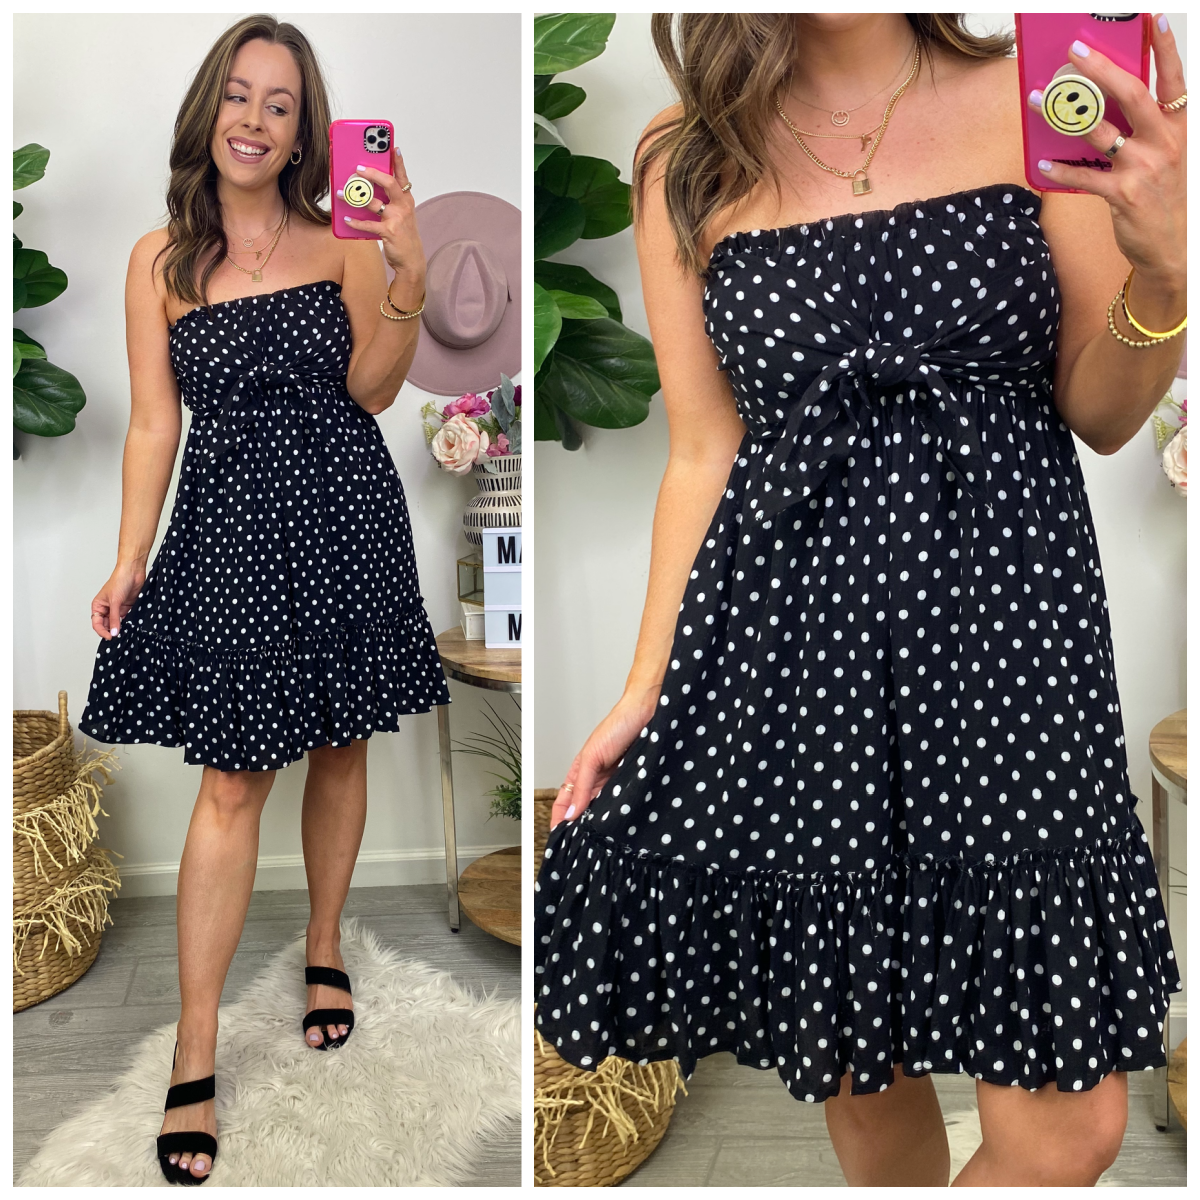  Stay Gorgeous Polka Dot Tie Dress - Madison and Mallory